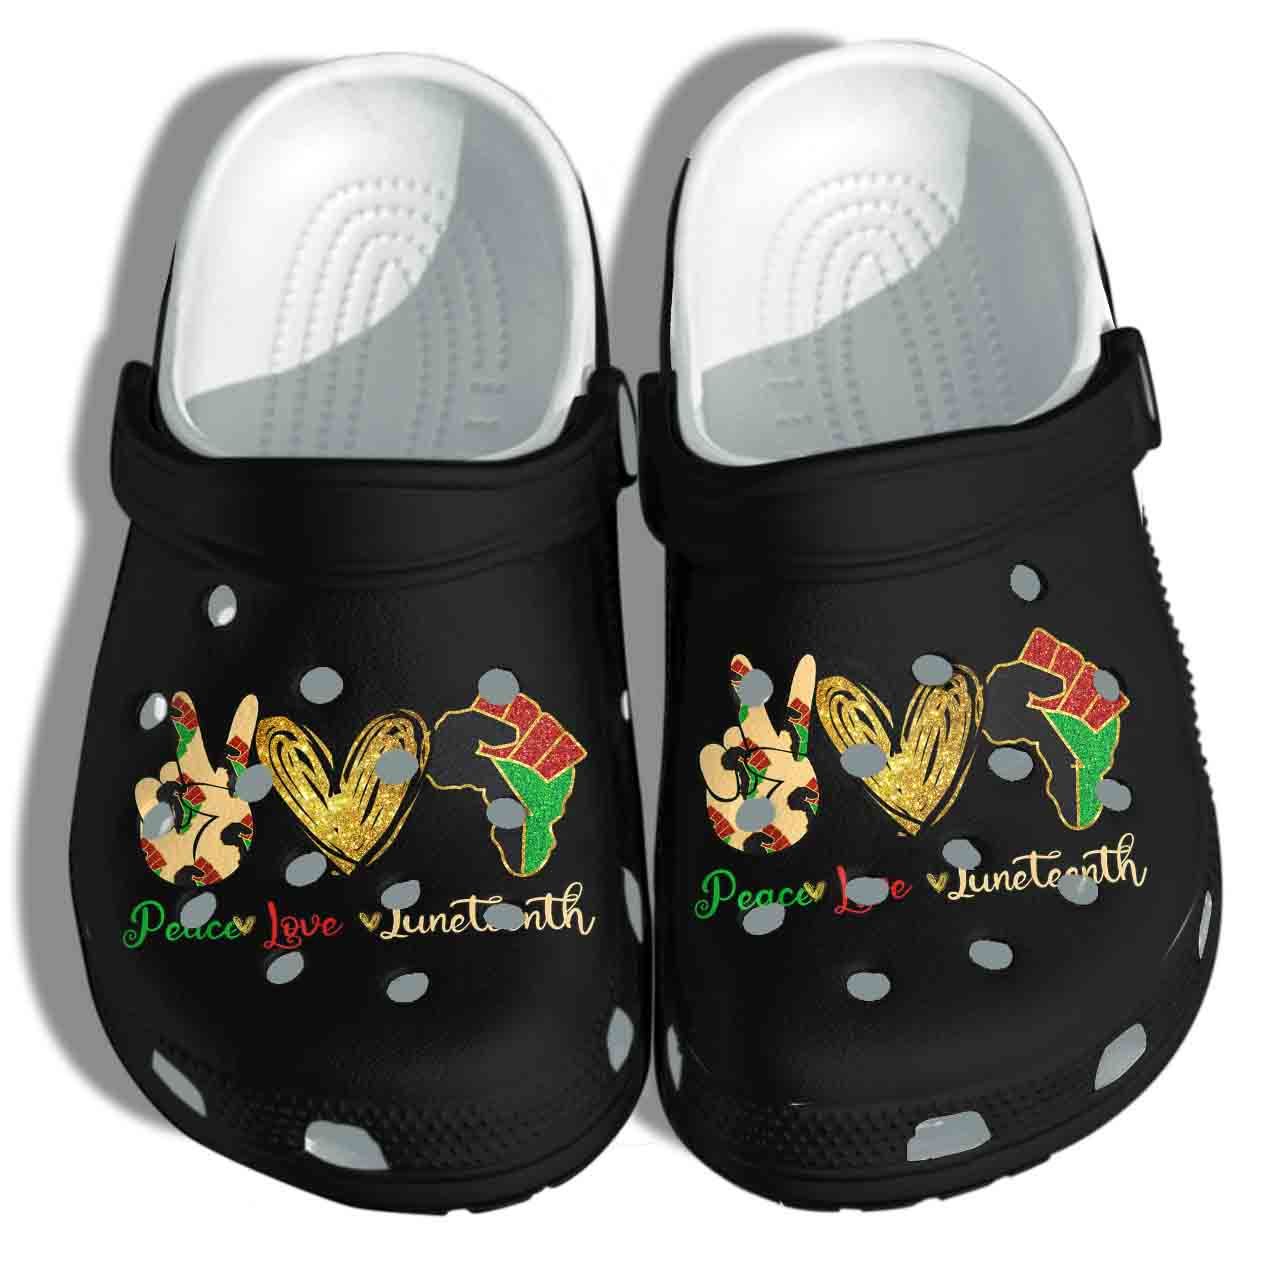 Peace Love Juneteenth, Black People Clog Birthday Gift For Man And Woman Friend